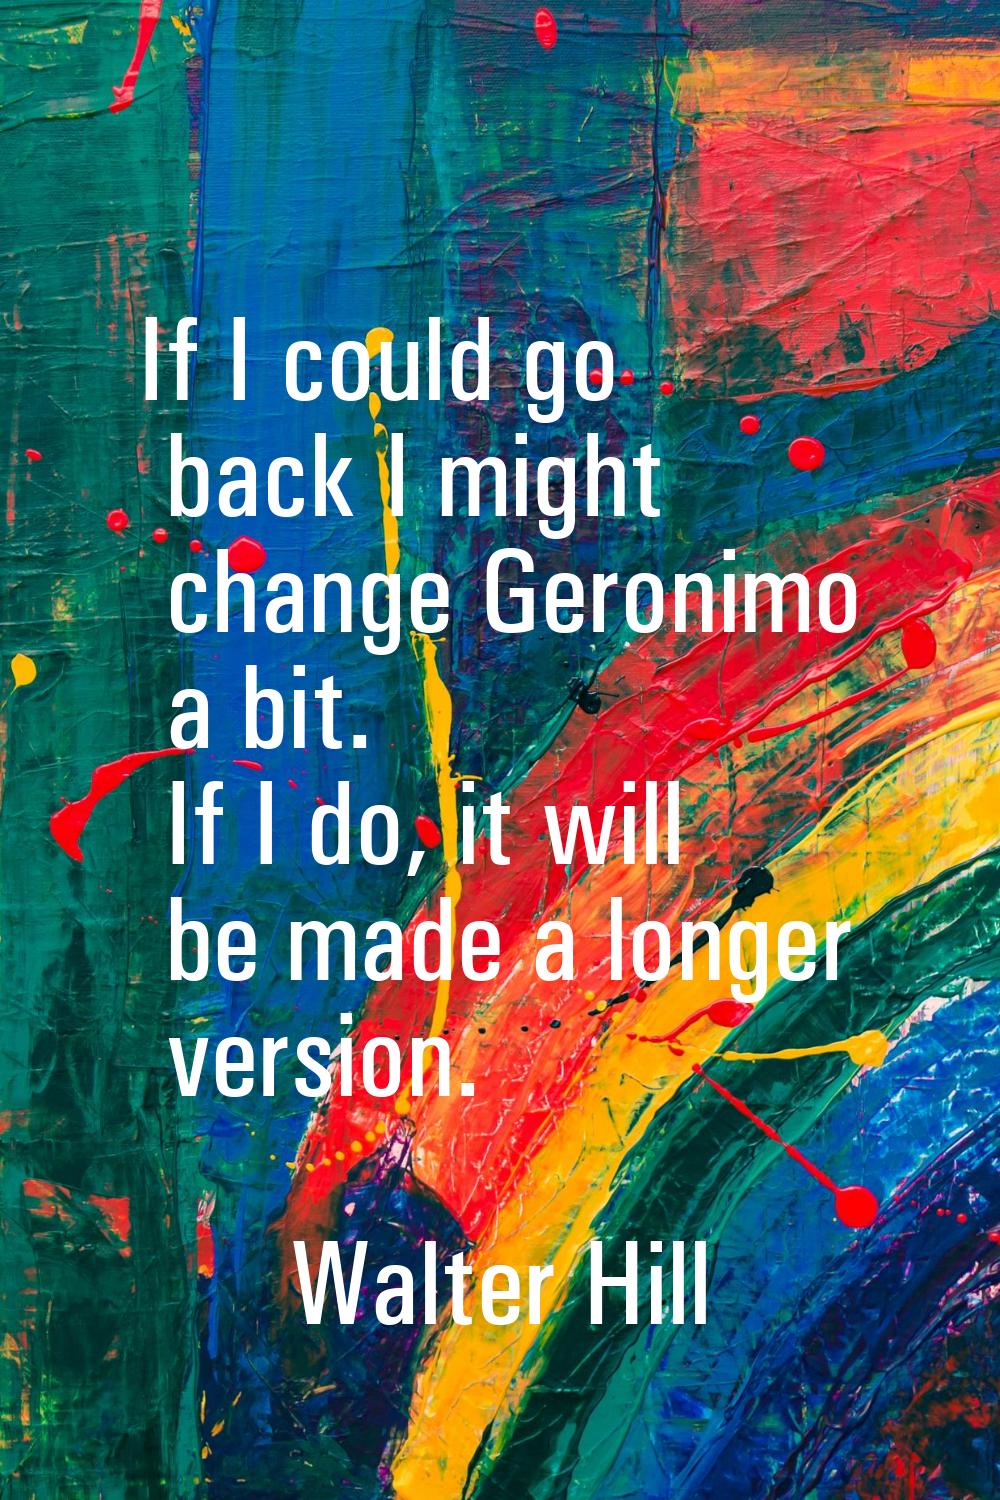 If I could go back I might change Geronimo a bit. If I do, it will be made a longer version.